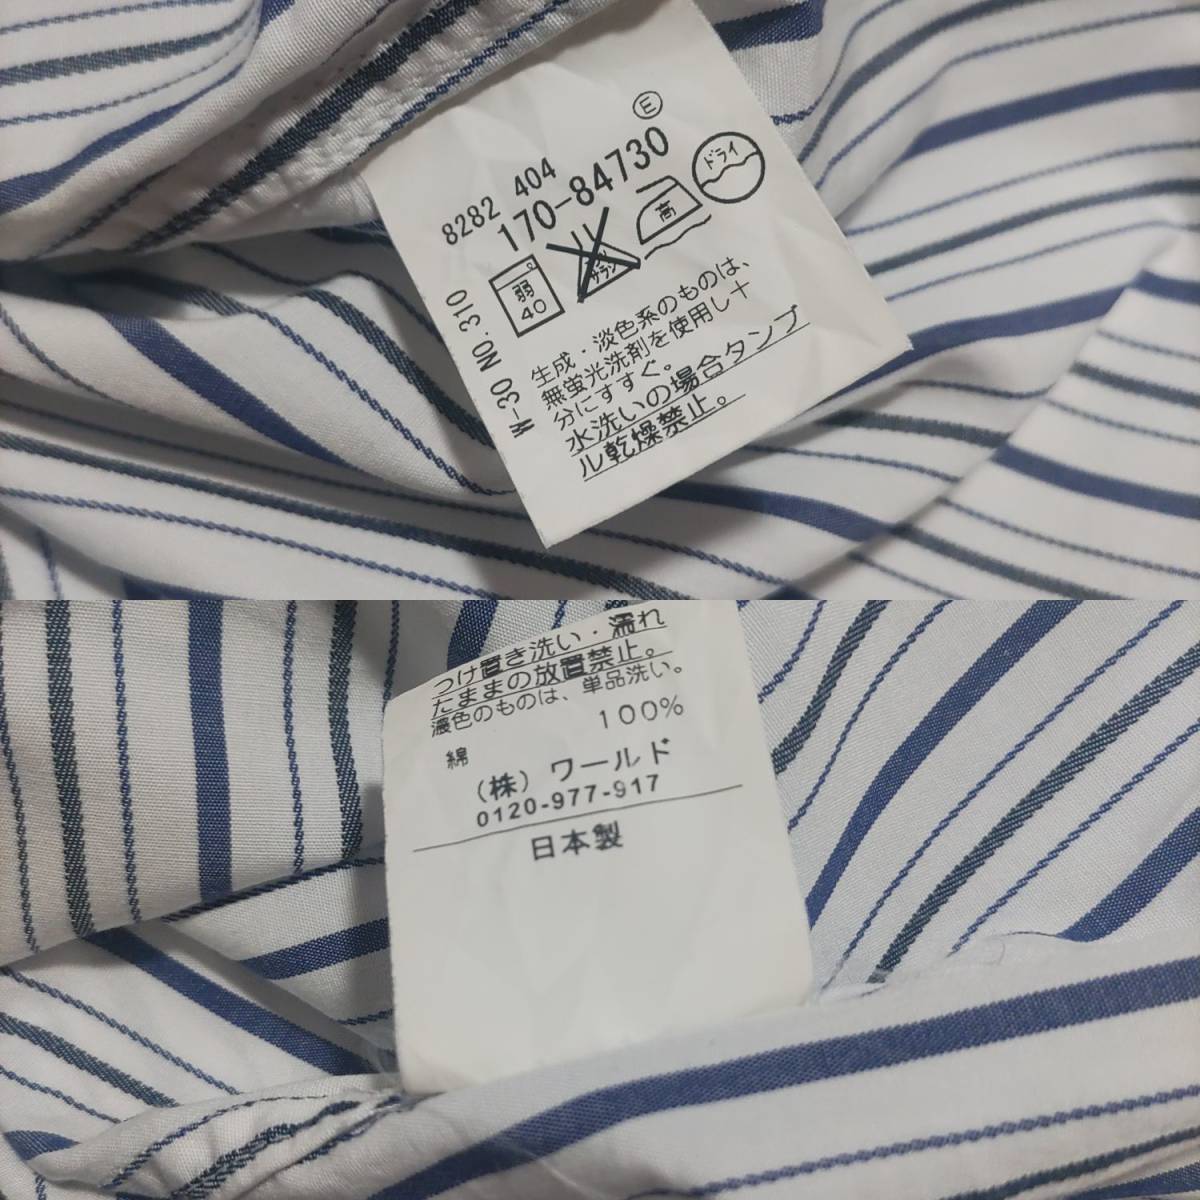  superior article TK short sleeves shirt size 3 white length . Hori zontaru color .. packet post possible world Takeo Kikuchi old clothes laundry Press ending 120